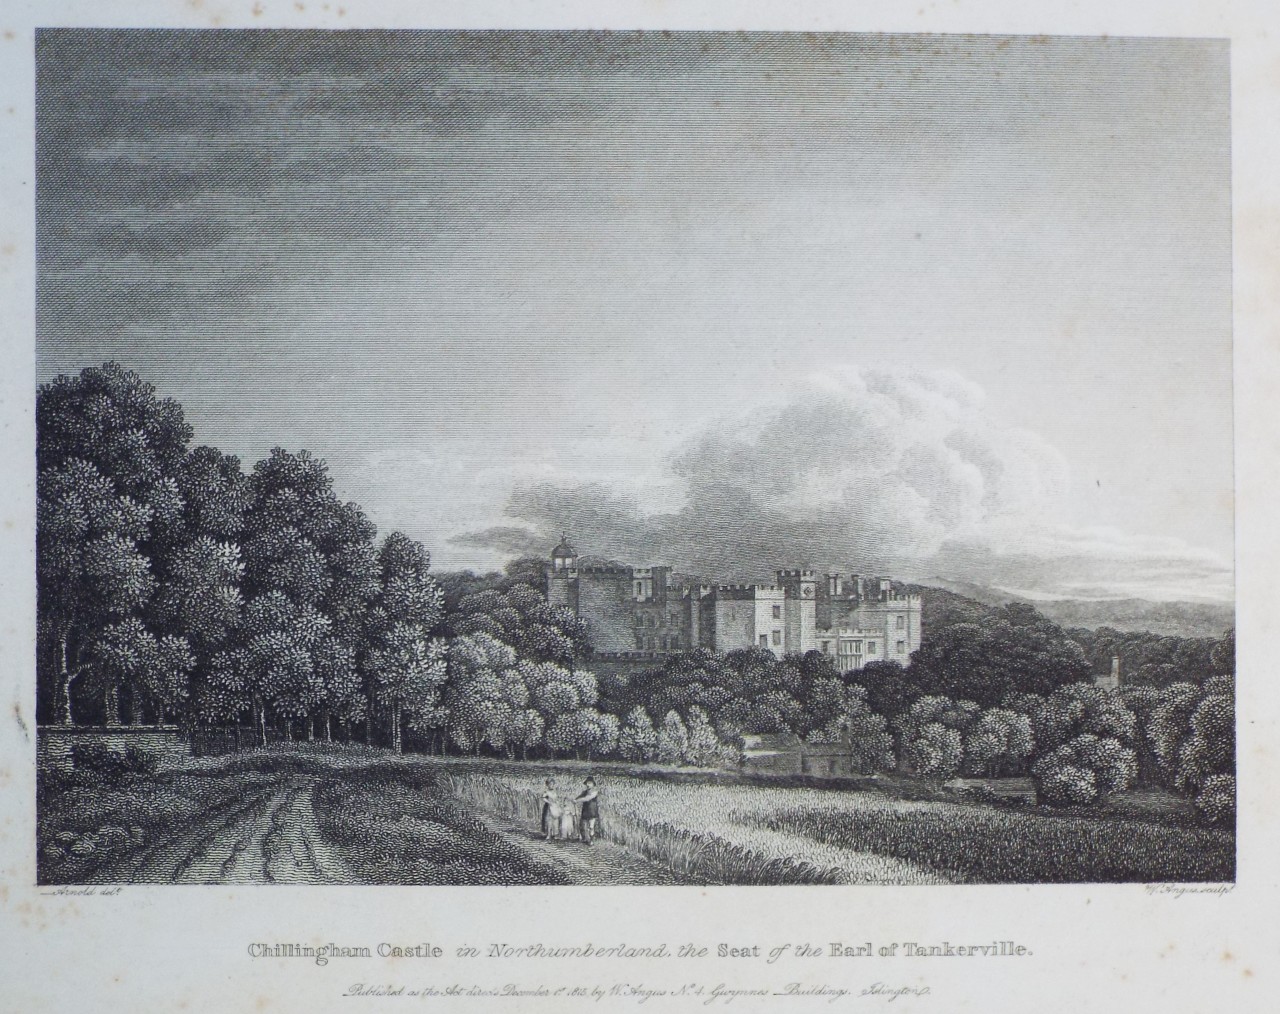 Print - Chillingham Castle in Northumberland, the Seat of the Earl of Tankerville. - Angus